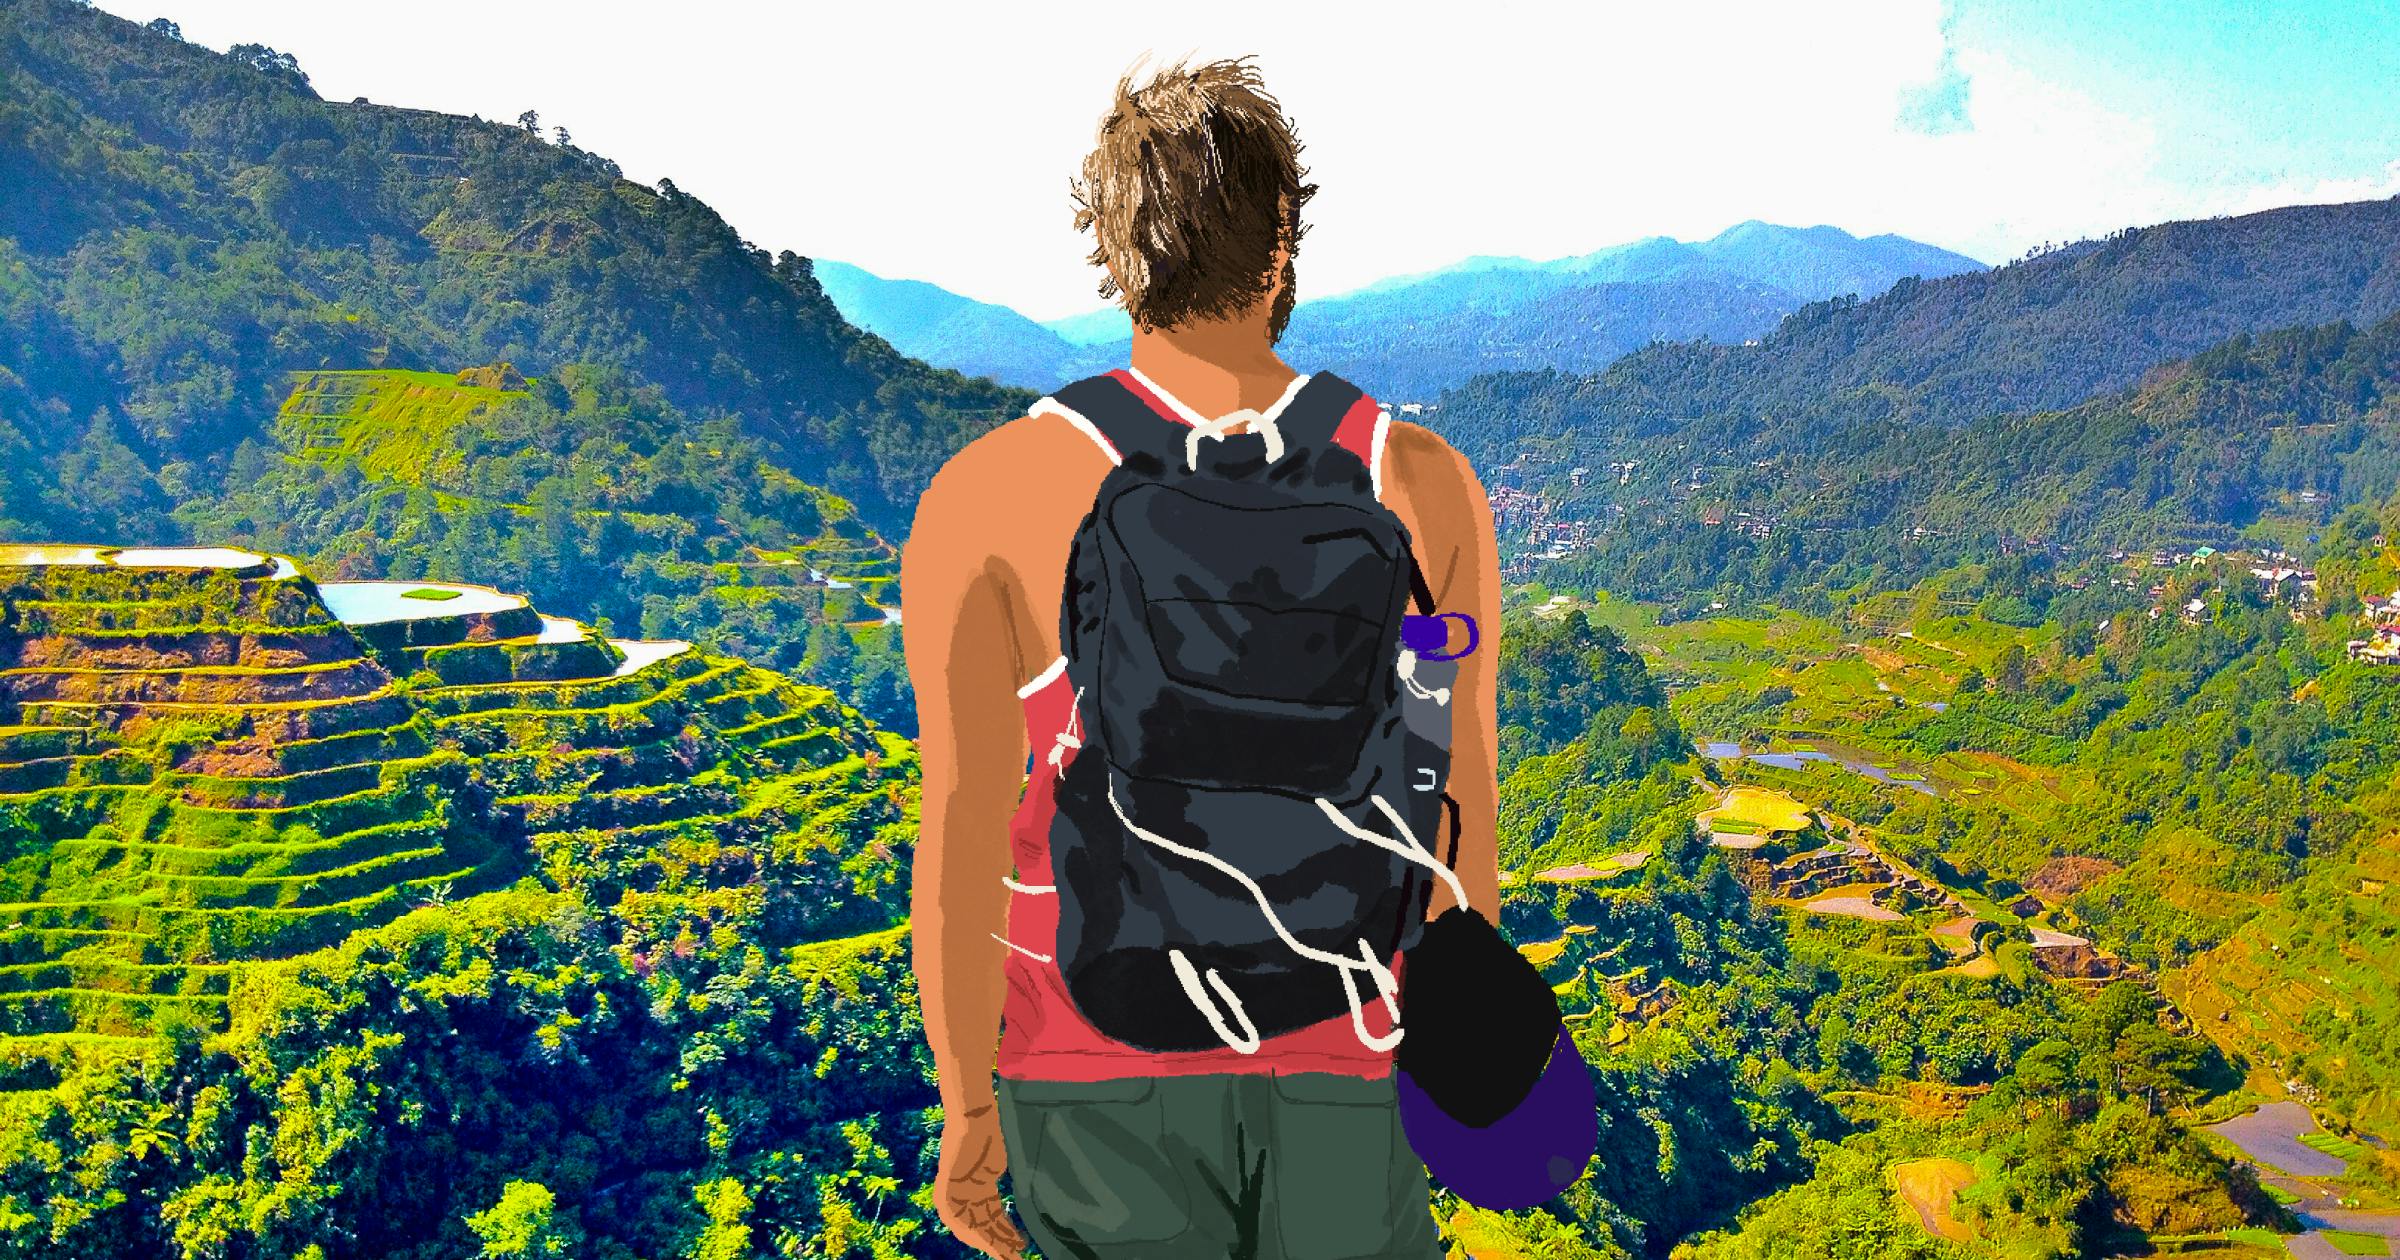 Illustration of a man overlooking the mountains with a backpack and hat